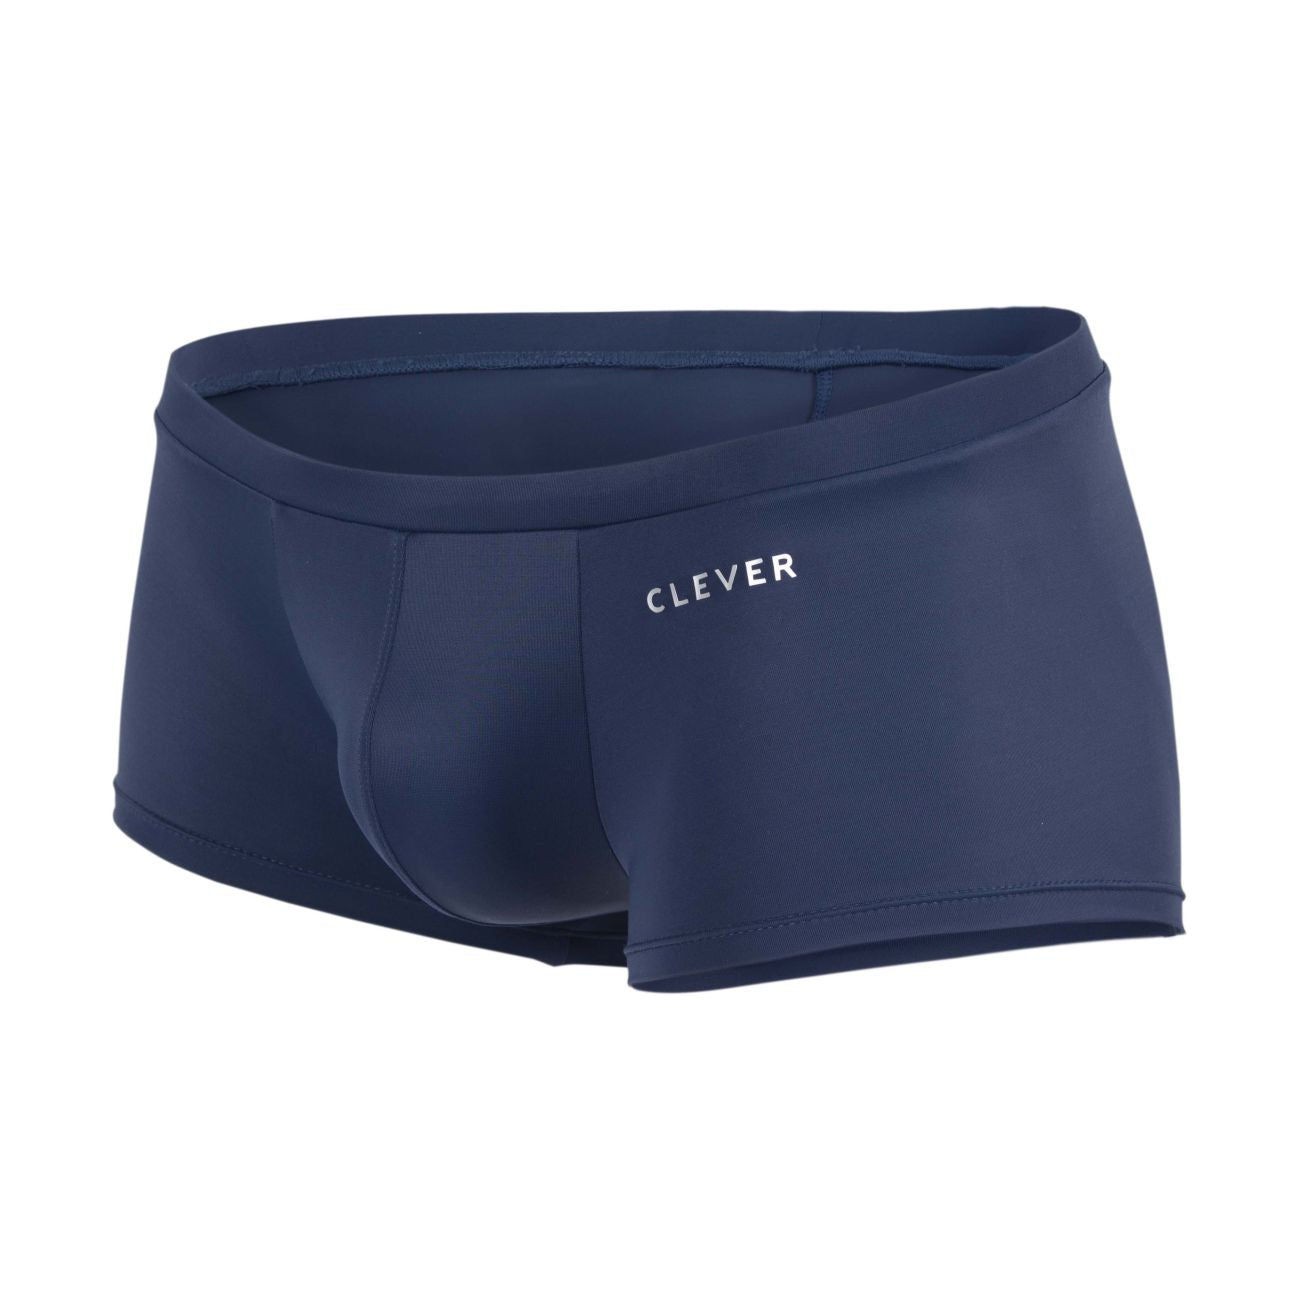 Clever Purity Trunk Trunk- CITYBOYZ★USA